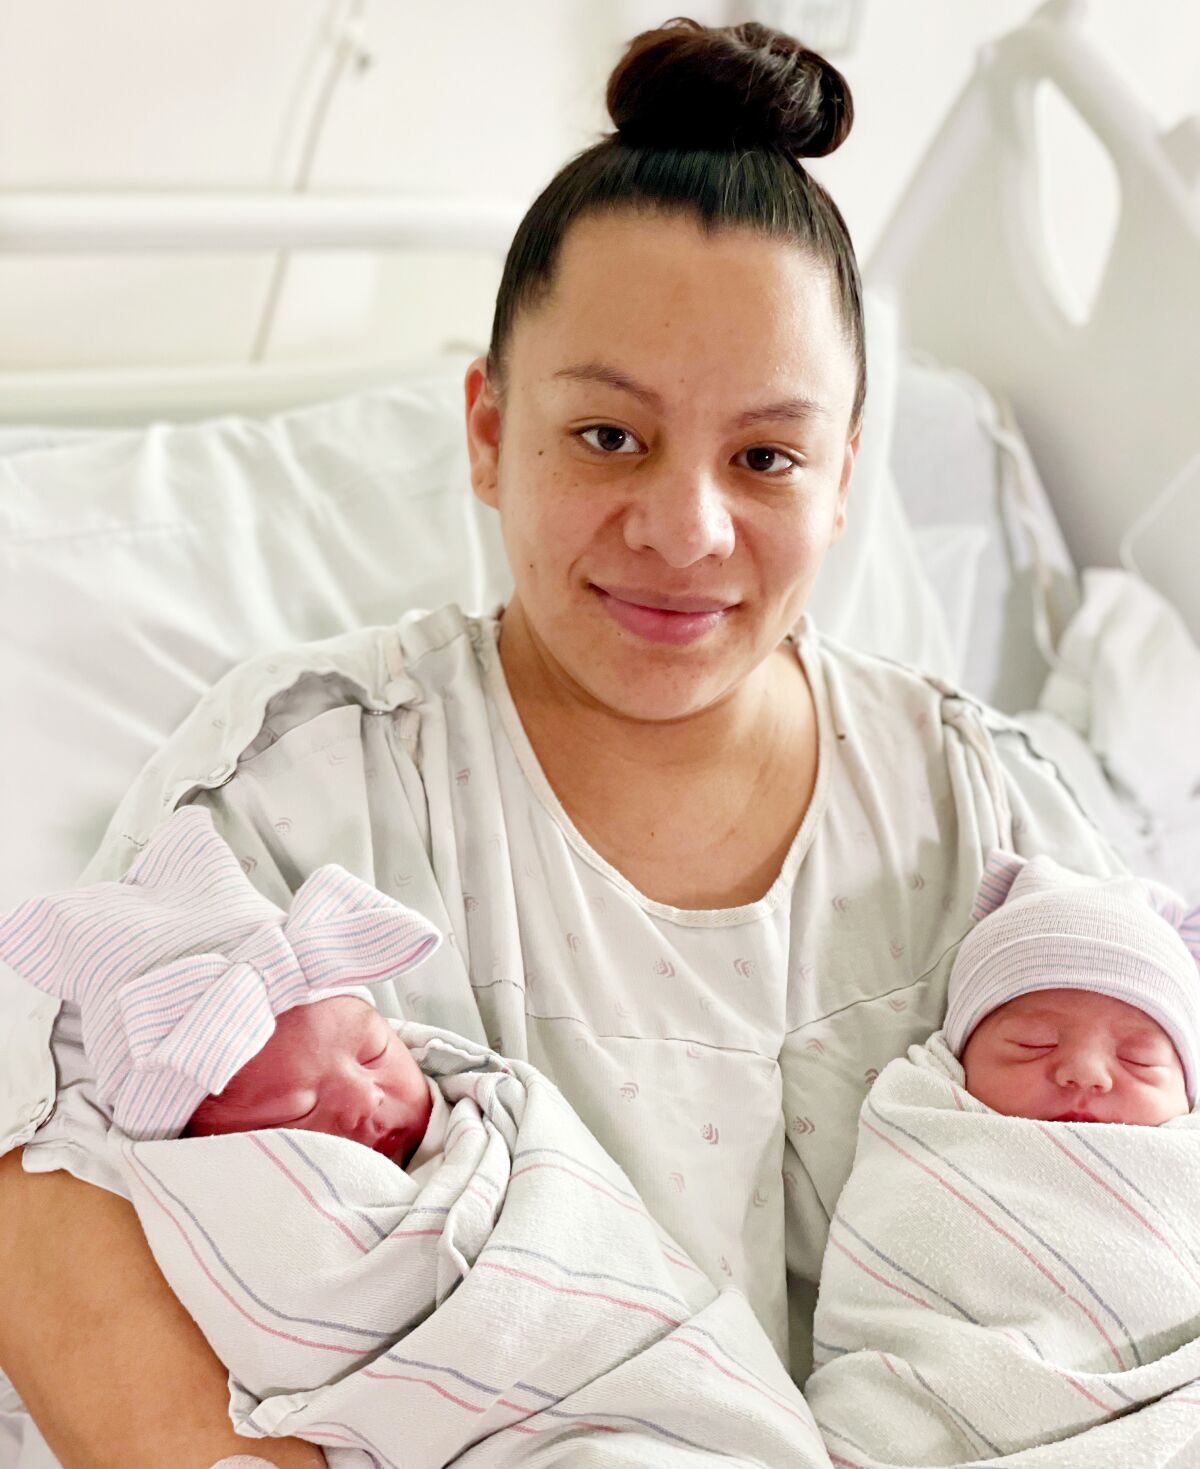 A woman smiles in a hospital bed with twins in each arm